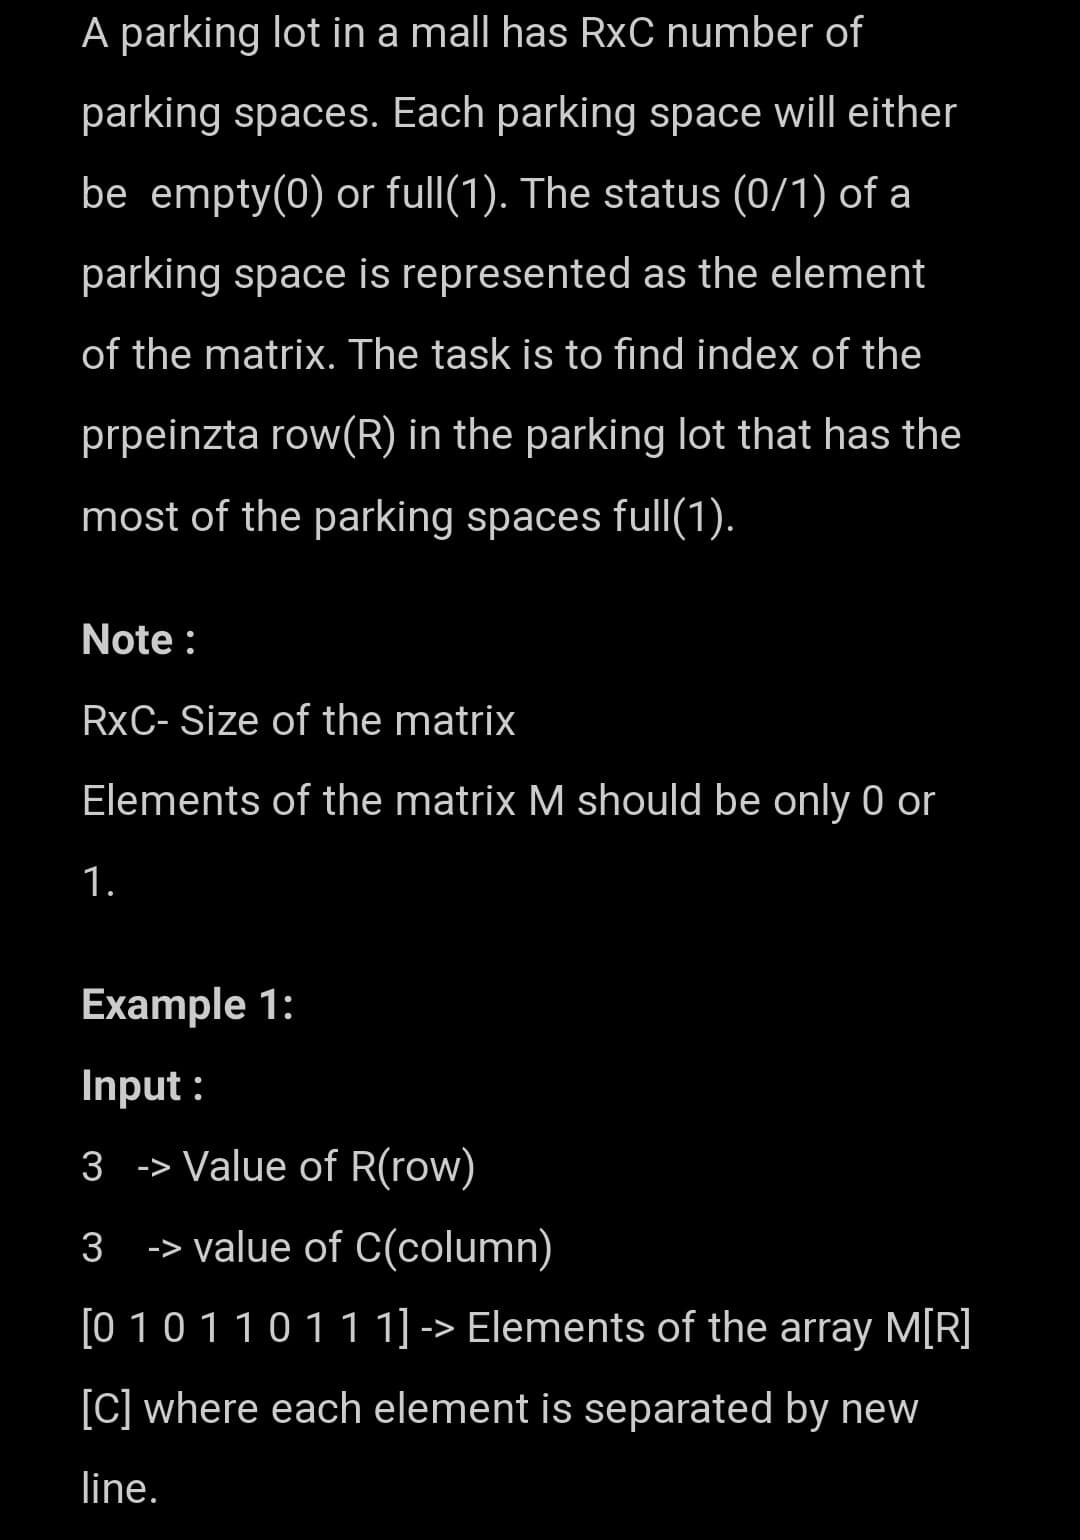 A parking lot in a mall has RxC number of
parking spaces. Each parking space will either
be empty(0) or full(1). The status (0/1) of a
parking space is represented as the element
of the matrix. The task is to find index of the
prpeinzta row(R) in the parking lot that has the
most of the parking spaces full(1).
Note :
RXC- Size of the matrix
Elements of the matrix M should be only 0 or
1.
Example 1:
Input:
3
-> Value of R(row)
3
-> value of C(column)
[0 1 0 1 1 0 1 1 1] -> Elements of the array M[R]
[C] where each element is separated by new
line.